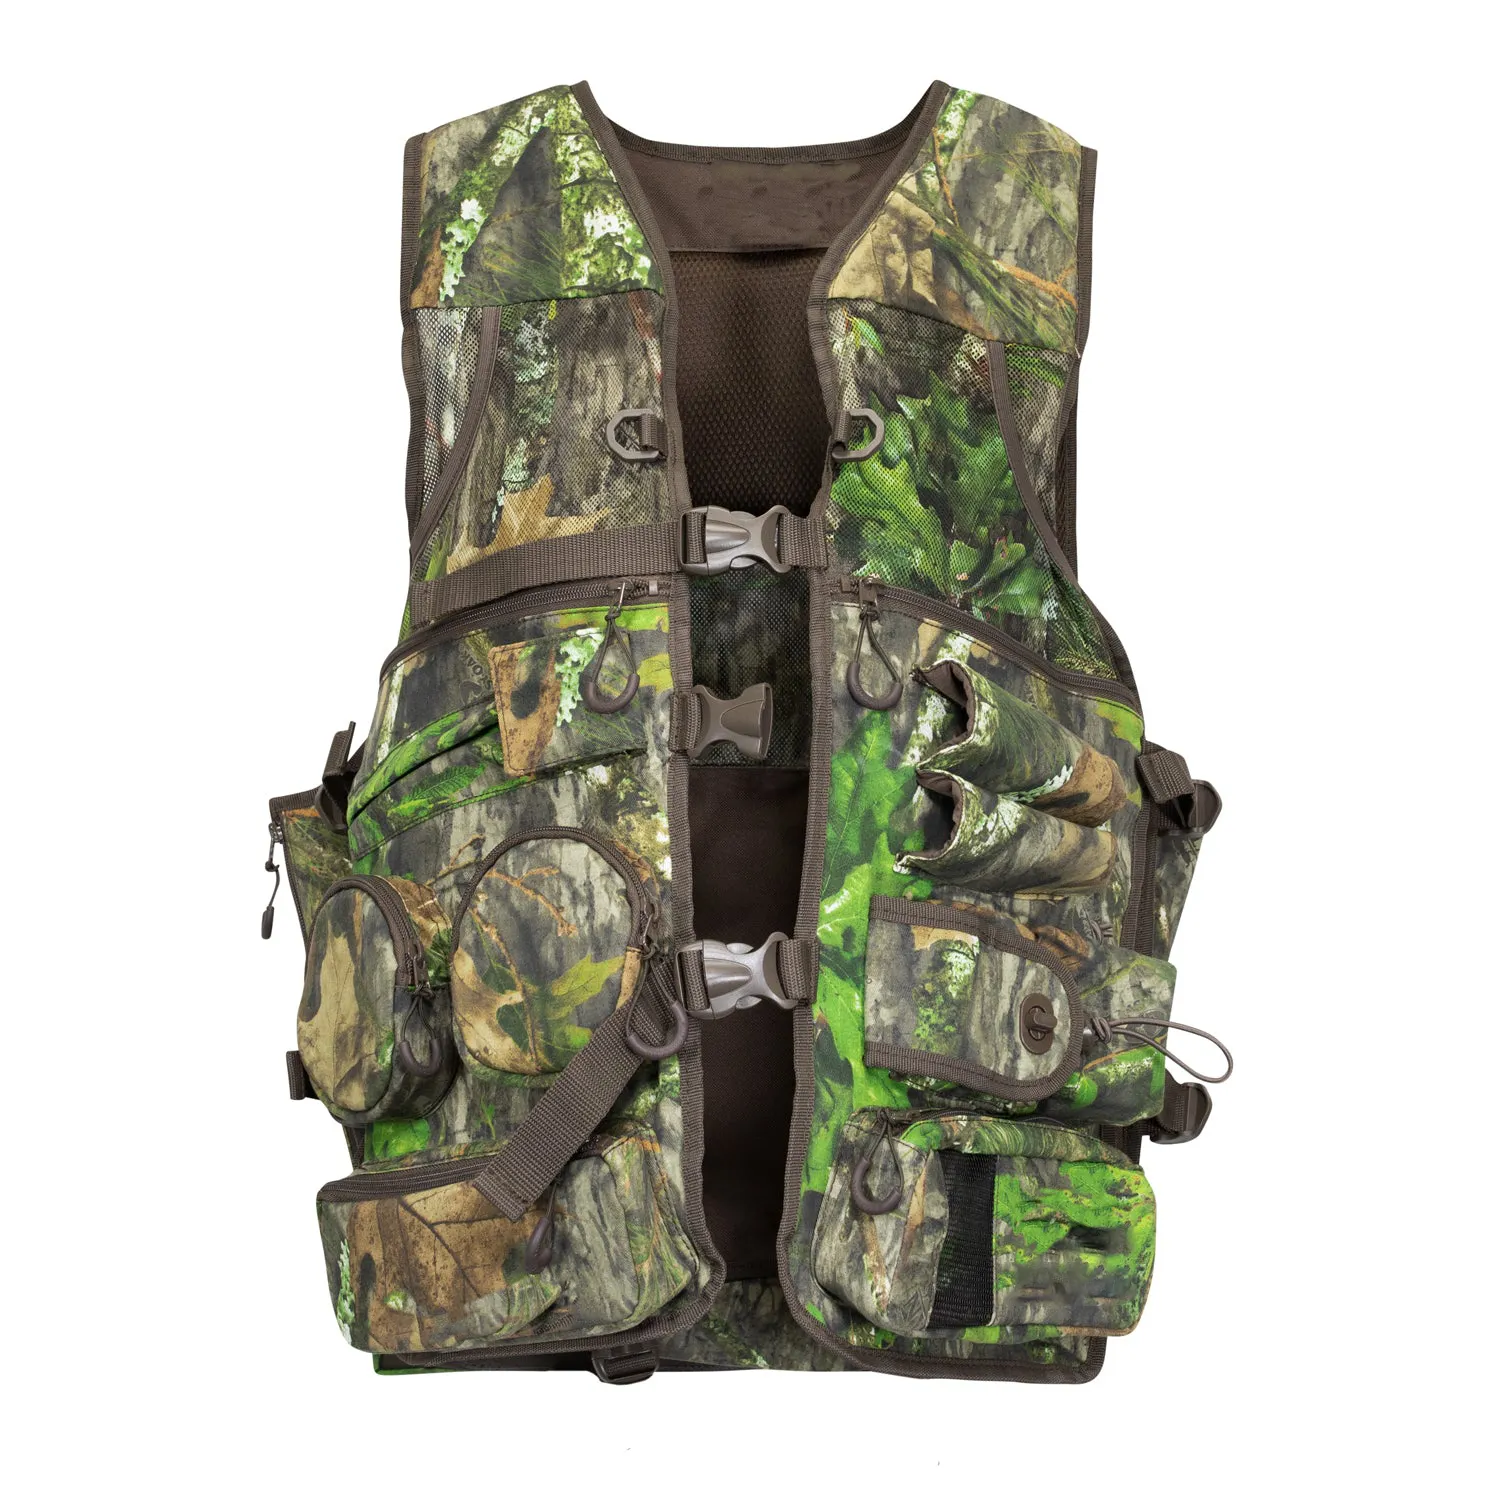 Turkey hunting Vest with large game bag a detachable cushion | Locator Call Sleeves Draw Cord Adjustment Tensioner